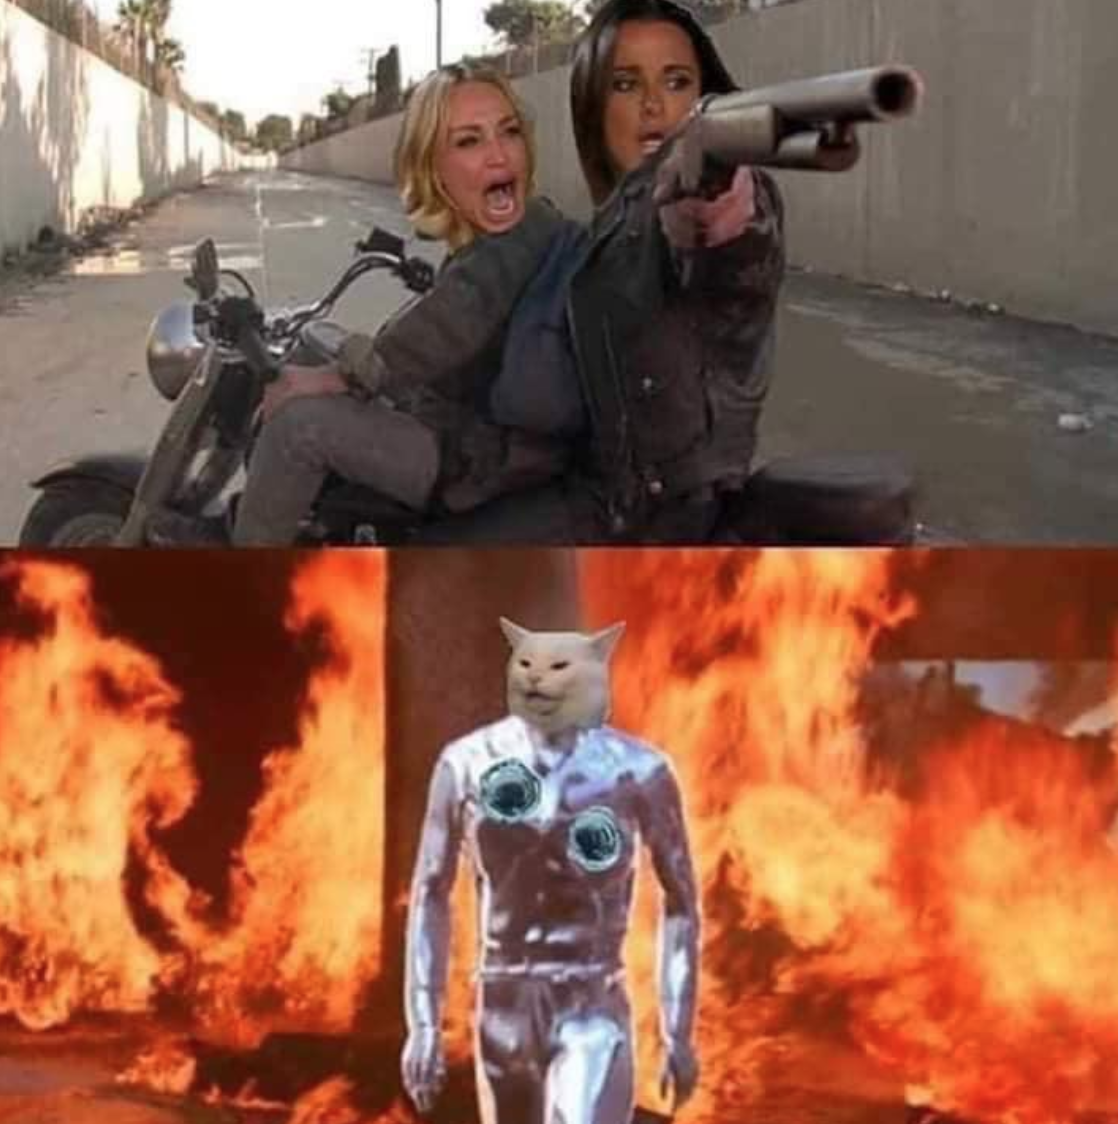 21 Memes About The “Terminator” Series That'll Make You Laugh And Maybe Cry